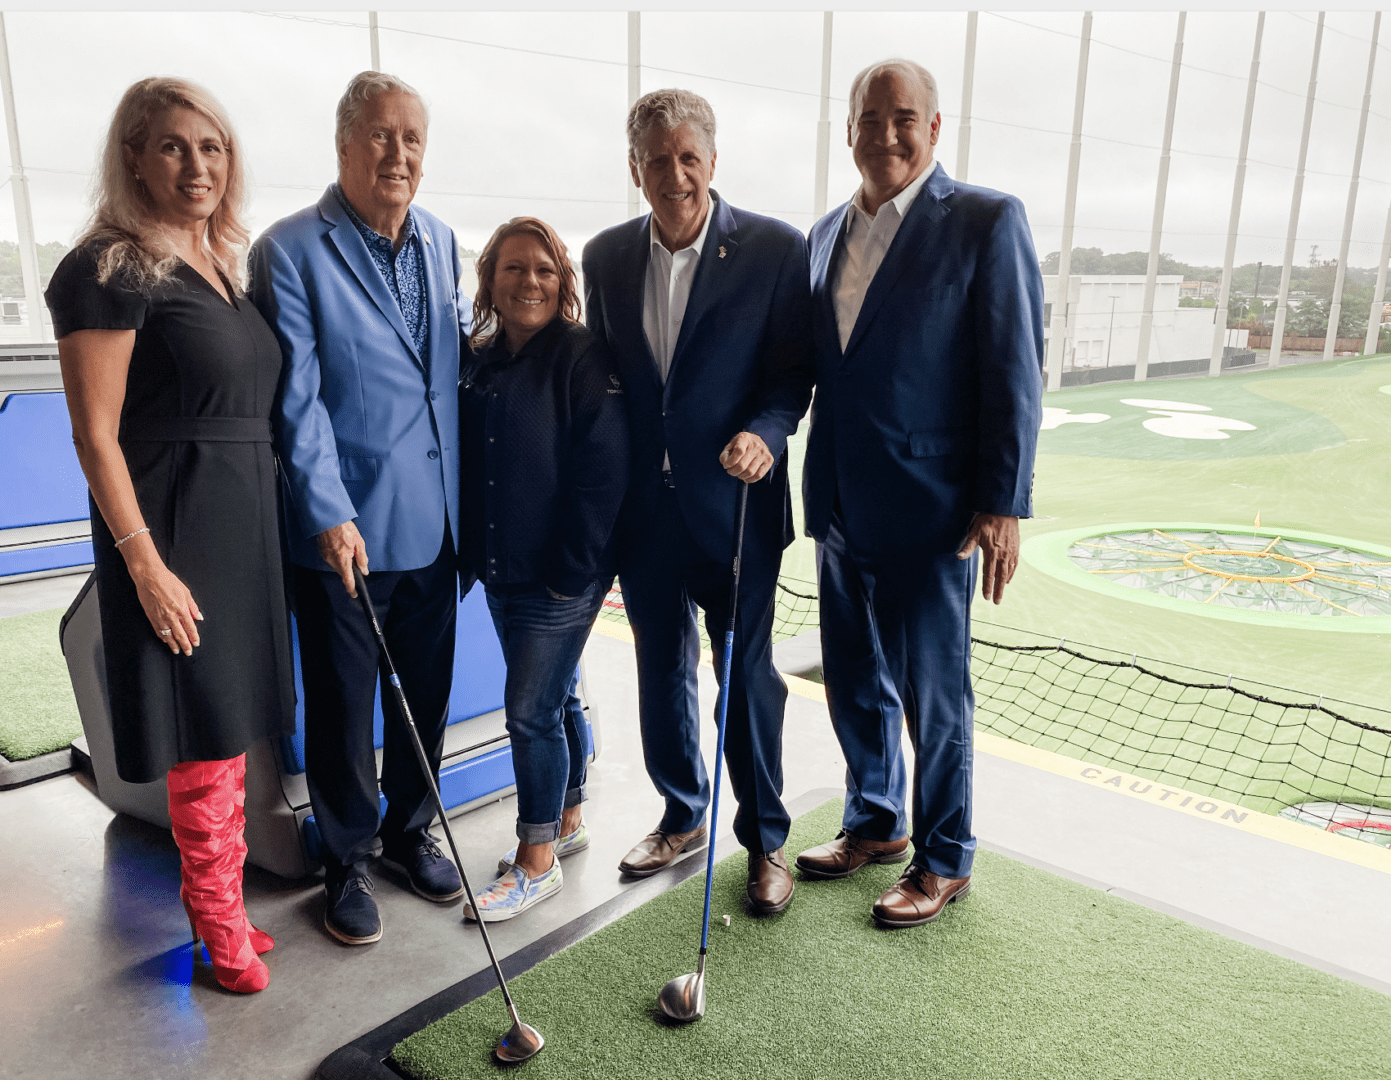 A group of people posing for a picture in front of a TopGolf course.